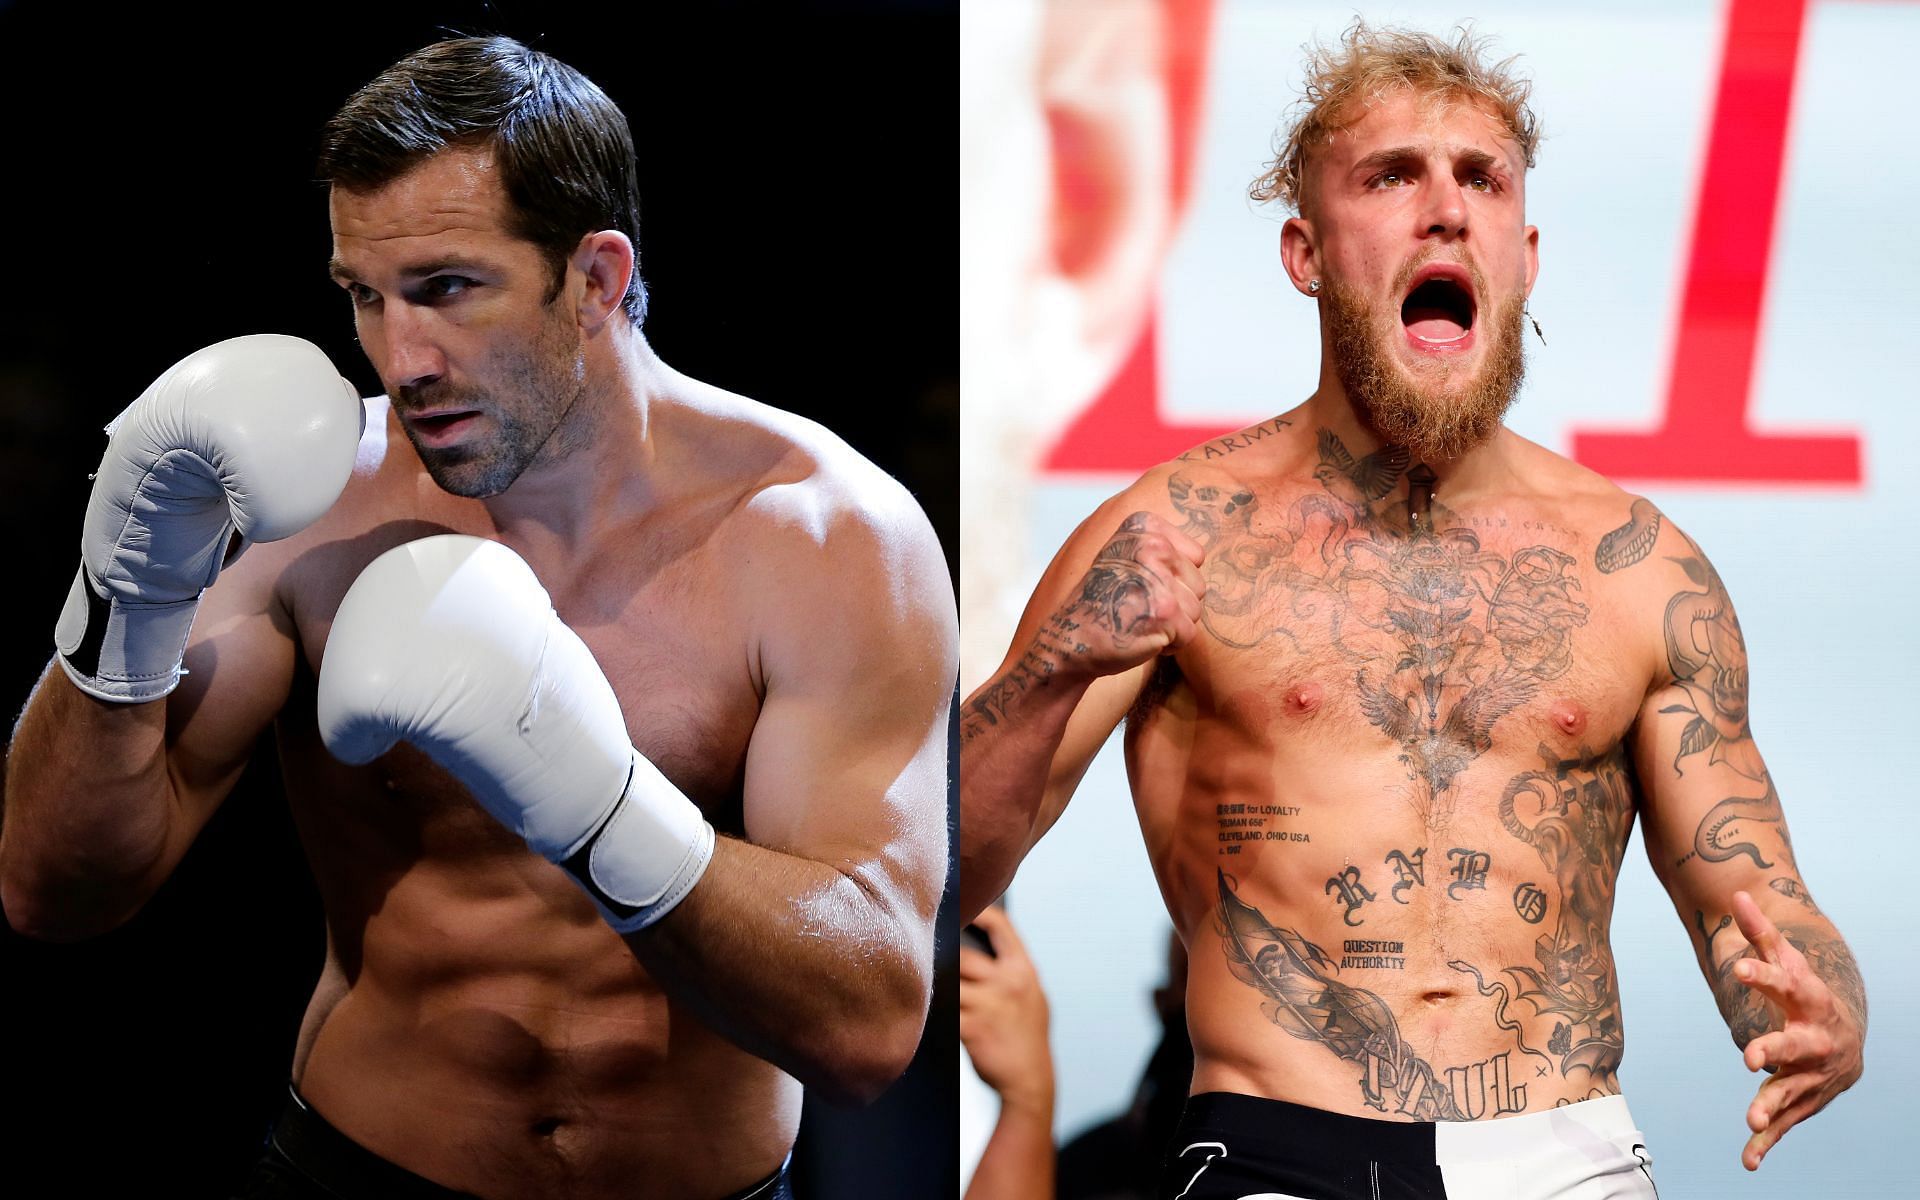 Luke Rockhold (left) and Jake Paul (right) (Image credits Getty Images)